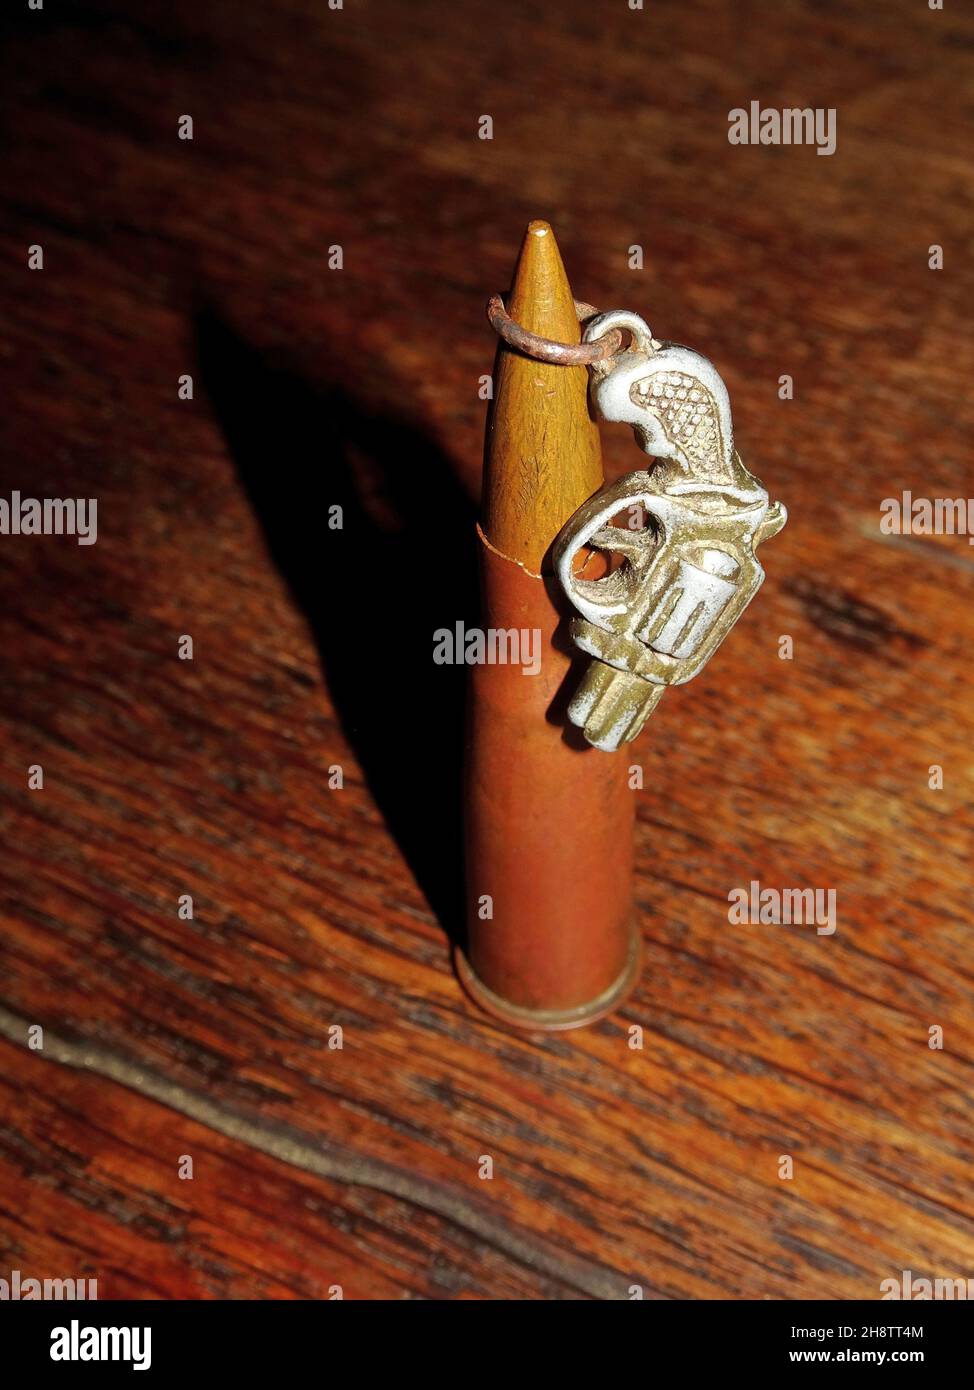 Vintage bullet and small toy gun on old wooden table Stock Photo